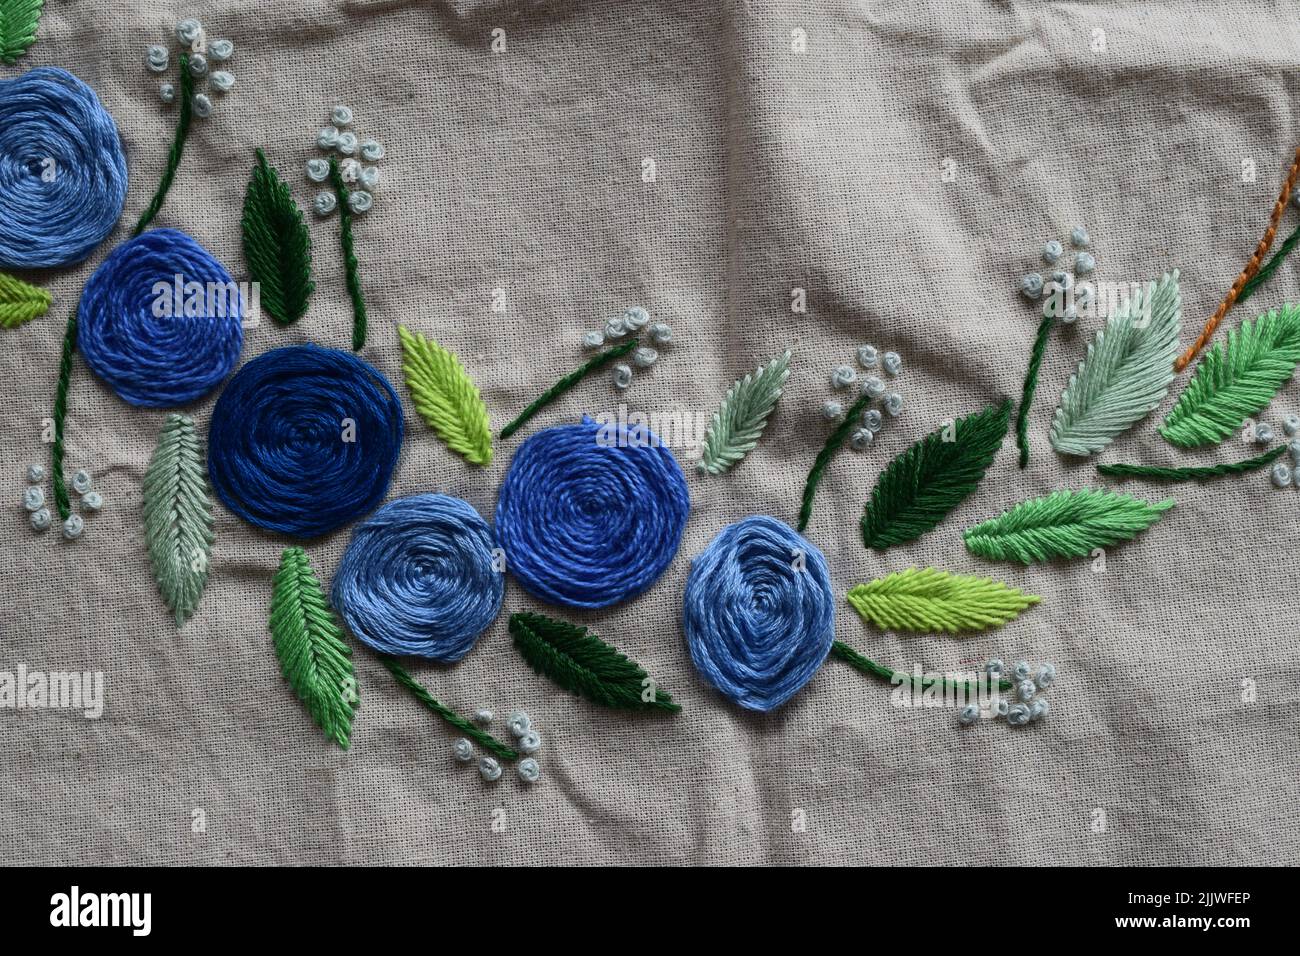 Embellished and embroidered fabric trims and ribbons on display Stock Photo  - Alamy